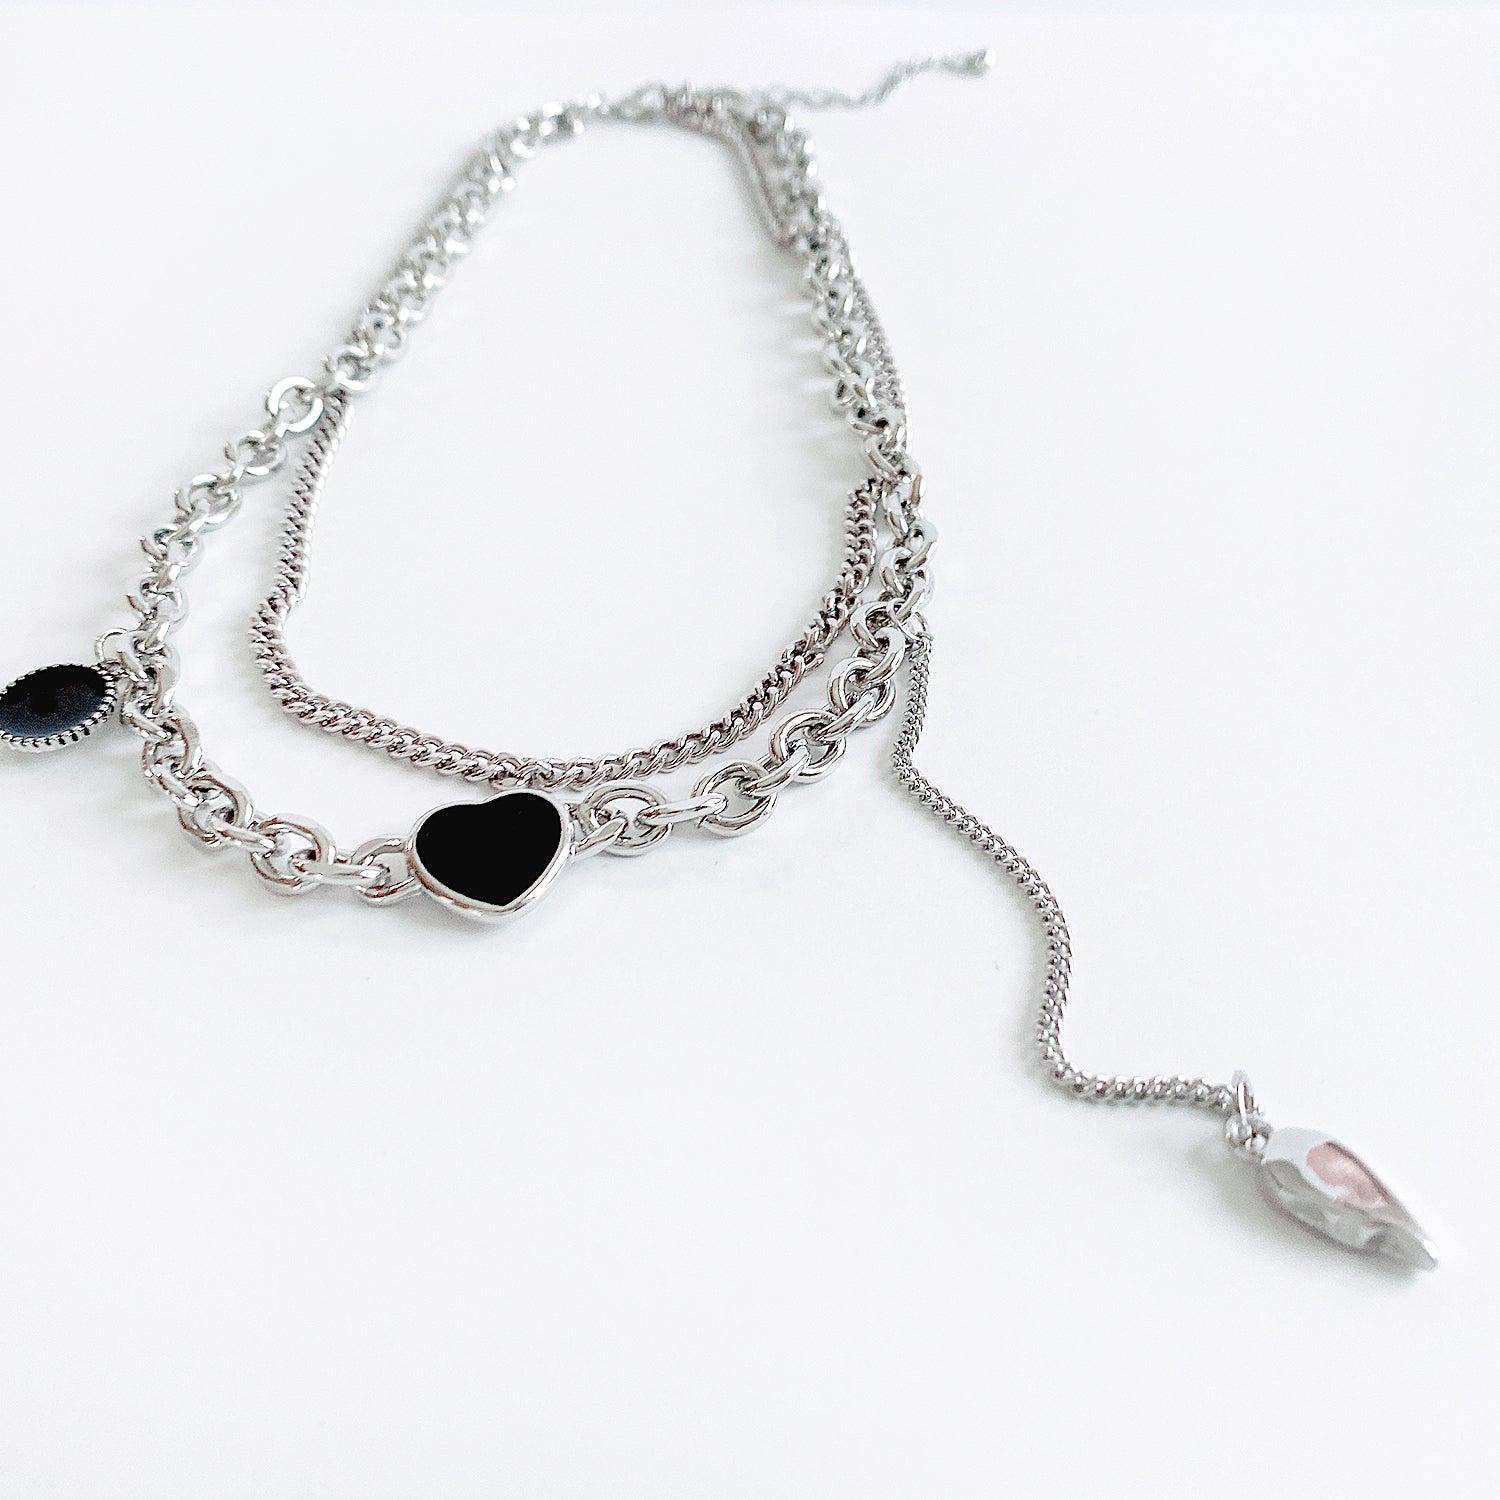 Black Heart Double Chain Necklace - YOUAREMYPOISON